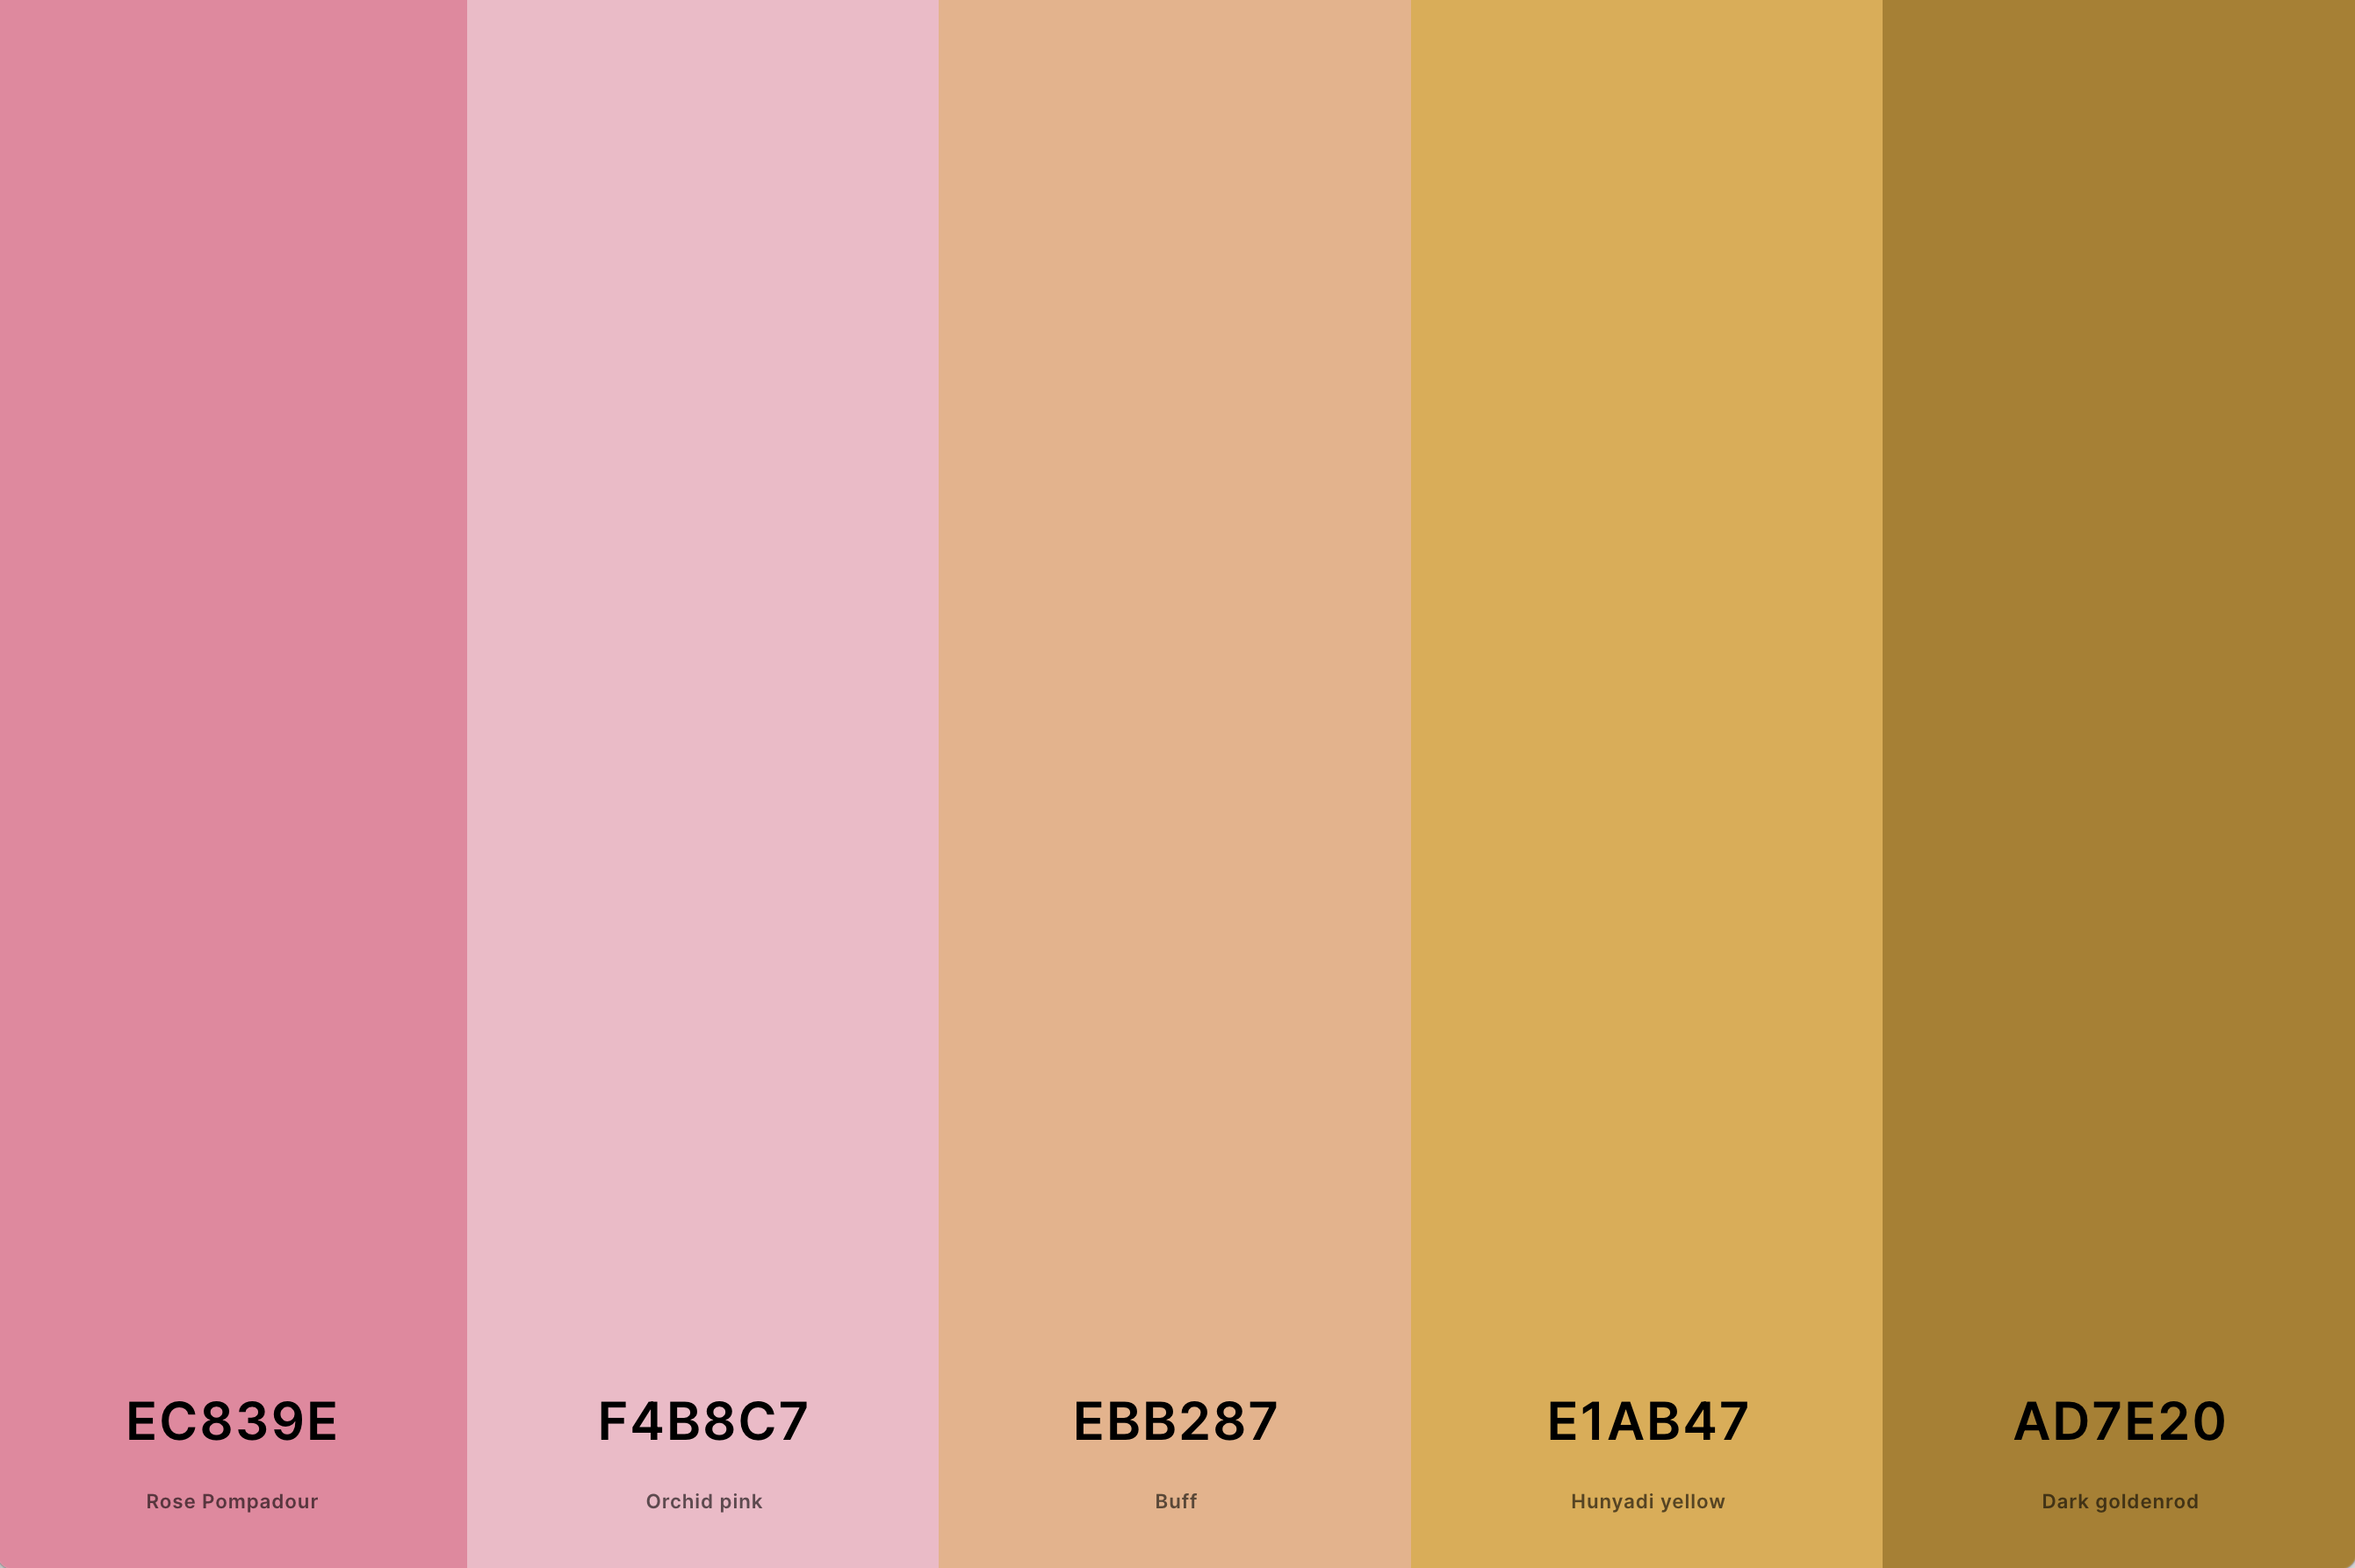 16. Pink And Gold Color Palette Color Palette with Rose Pompadour (Hex #EC839E) + Orchid Pink (Hex #F4B8C7) + Buff (Hex #EBB287) + Hunyadi Yellow (Hex #E1AB47) + Dark Goldenrod (Hex #AD7E20) Color Palette with Hex Codes